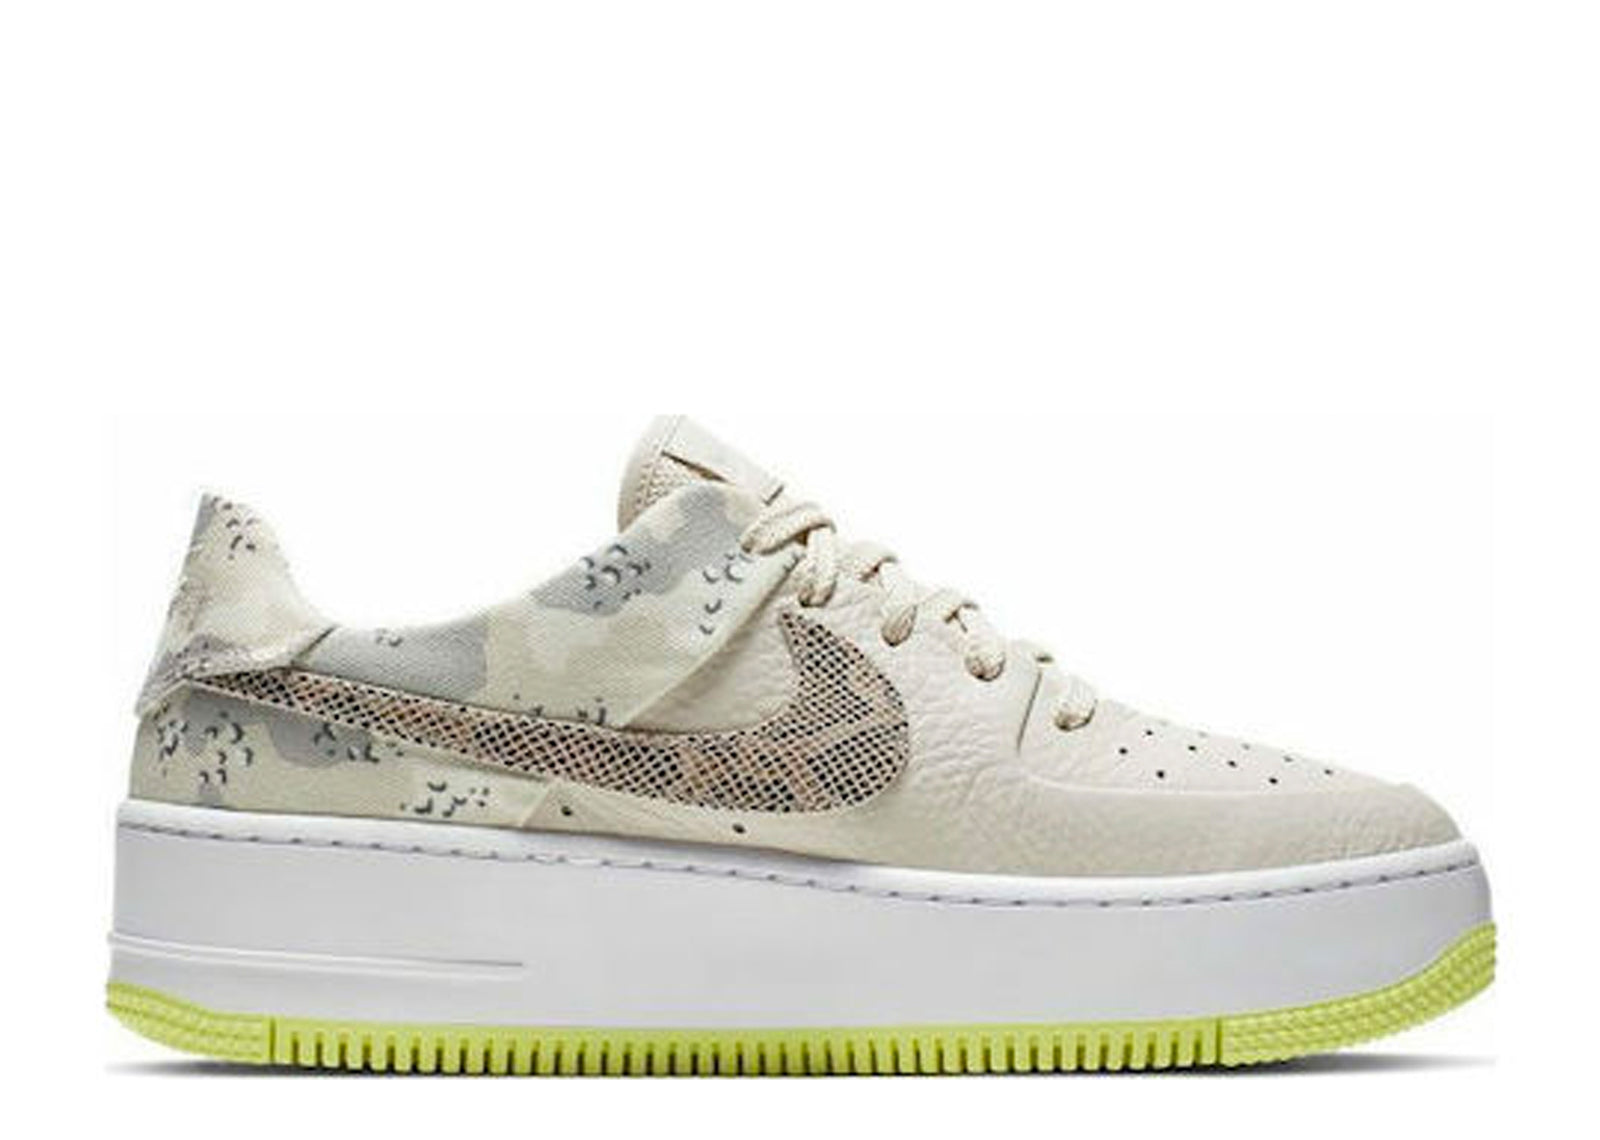 Second Chance - Multi Nike Air Force 1 Sage Low Orewood Camo - 42 | NEW